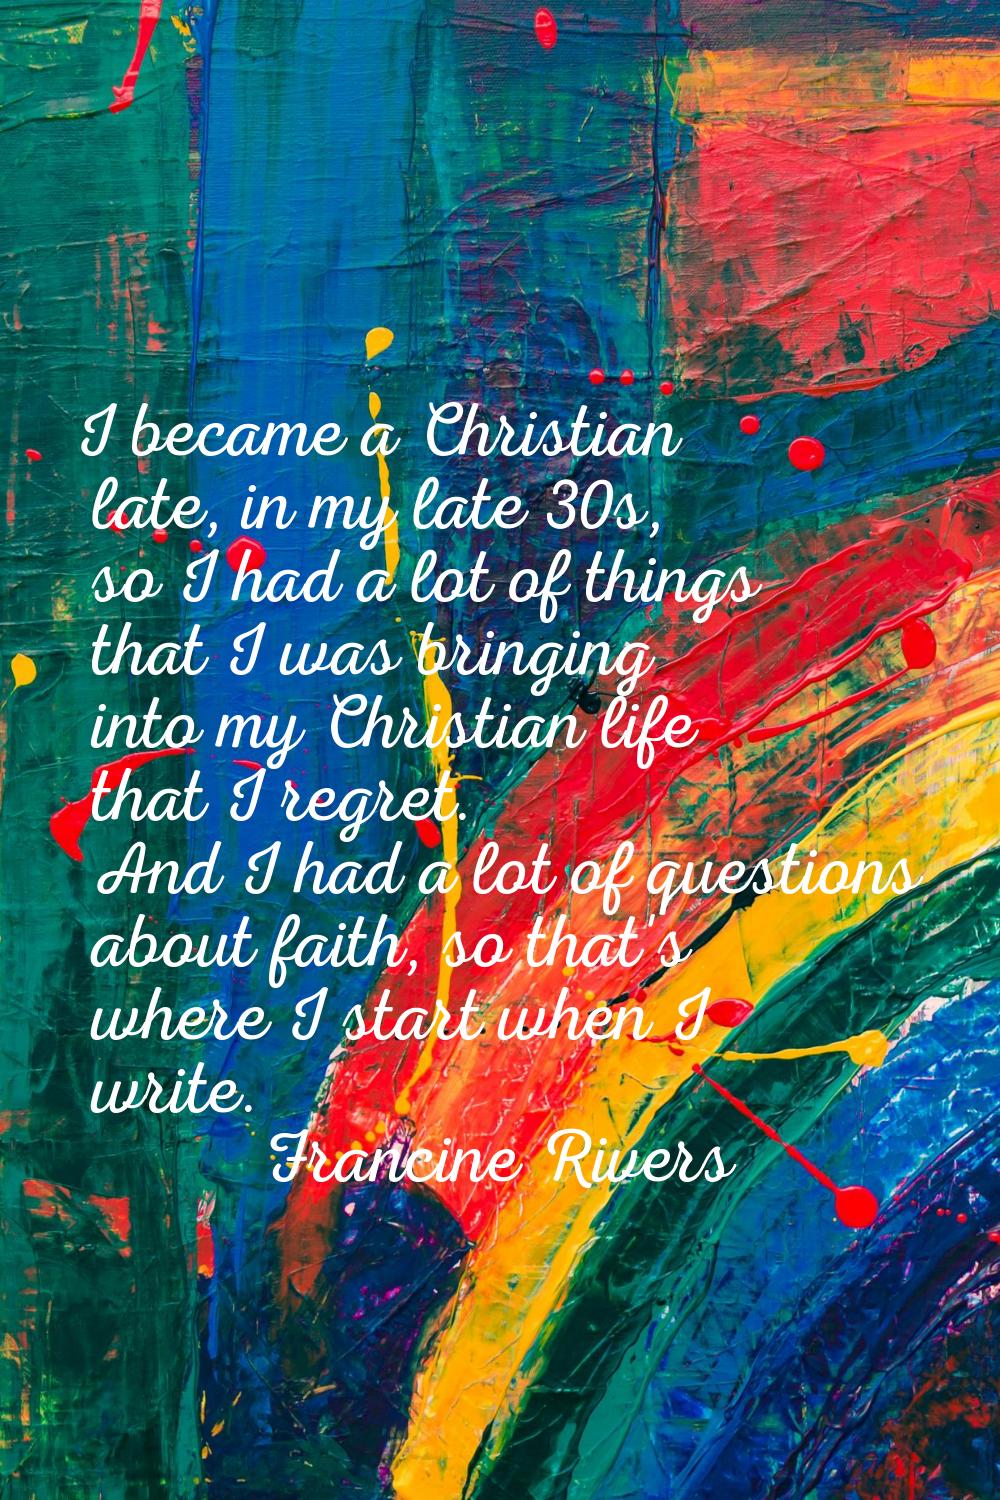 I became a Christian late, in my late 30s, so I had a lot of things that I was bringing into my Chr